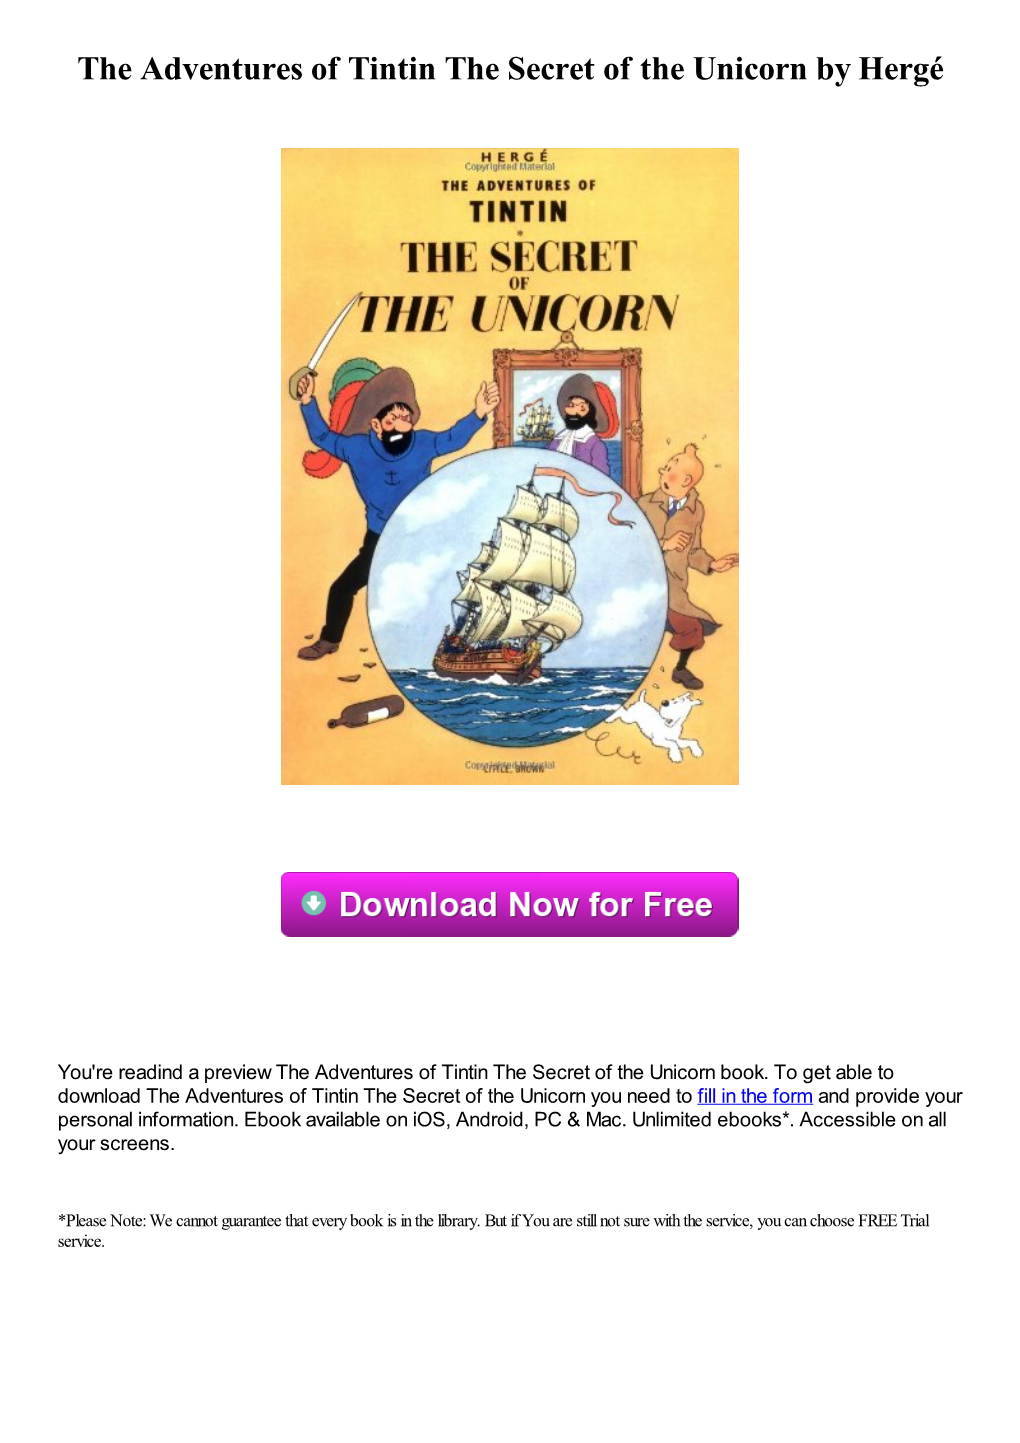 The Adventures of Tintin the Secret of the Unicorn by Hergé